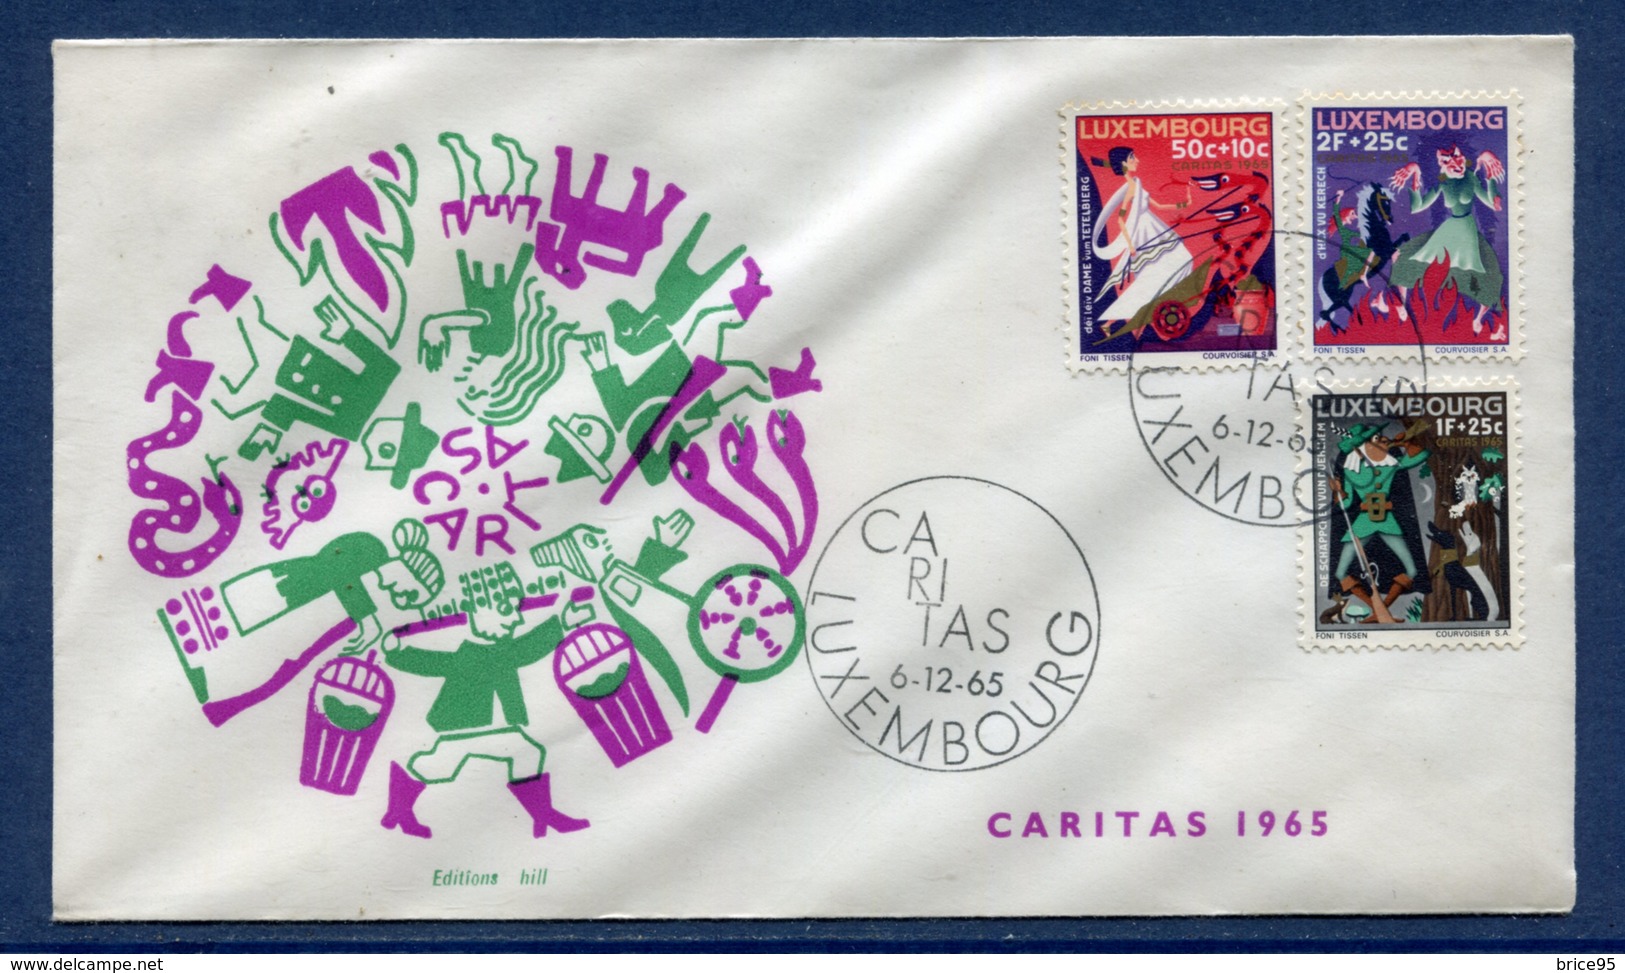 Luxembourg - FDC - Premier Jour - Caritas - 1965 - FDC